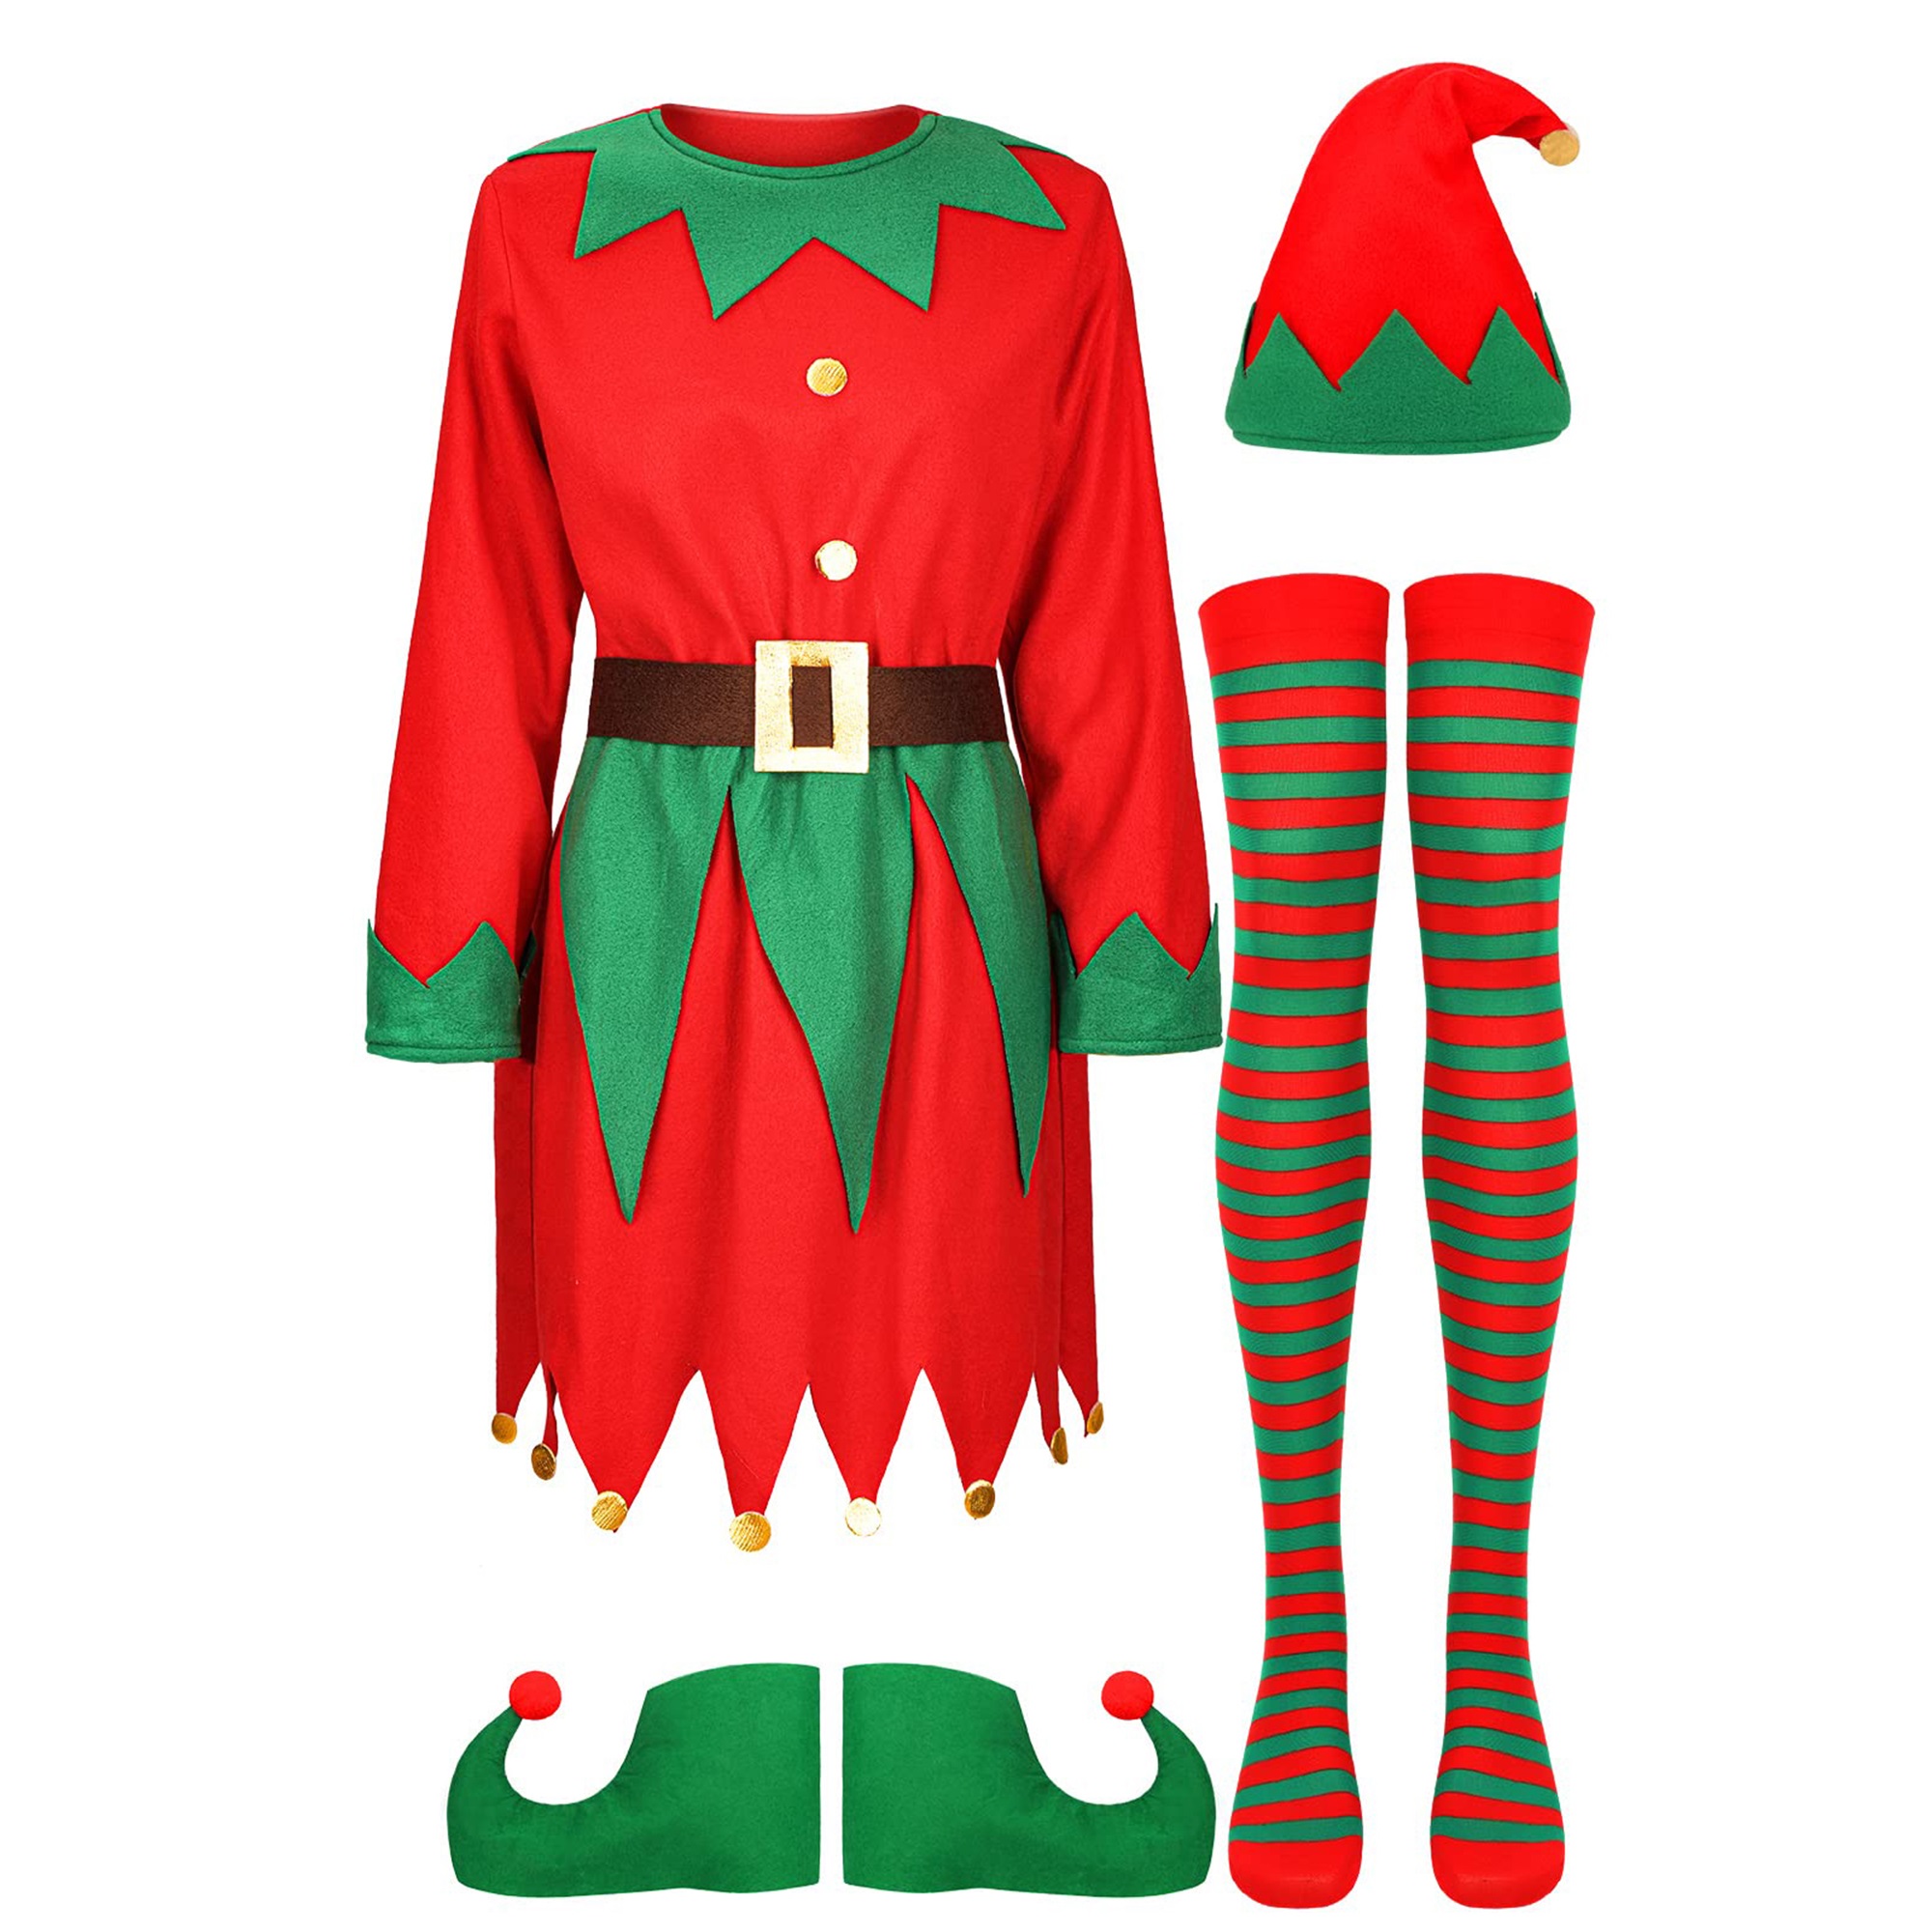 Douhoow Women Christmas Elf Girl Costume, Long Sleeve Dress+Hat+Shoes+Striped Stockings - image 2 of 9